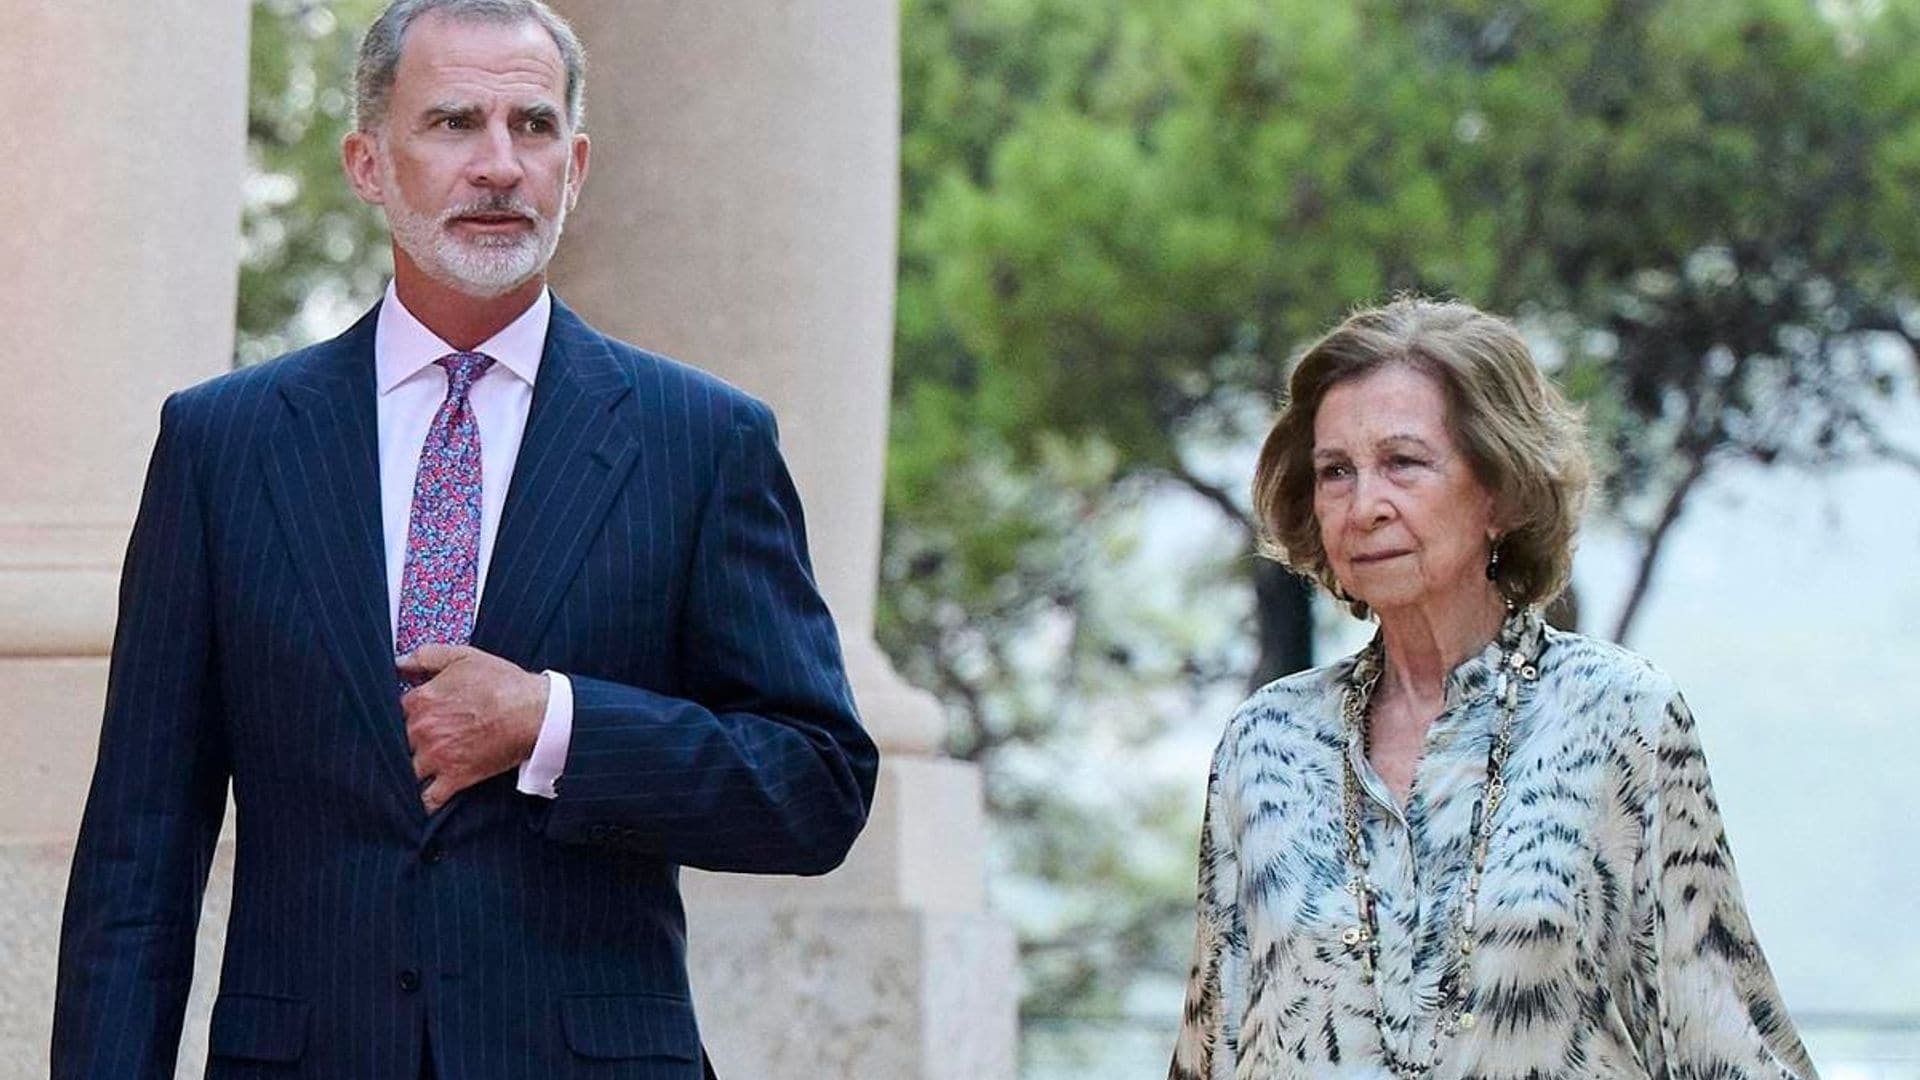 King Felipe shares update on mom following Queen Sofia’s hospitalization